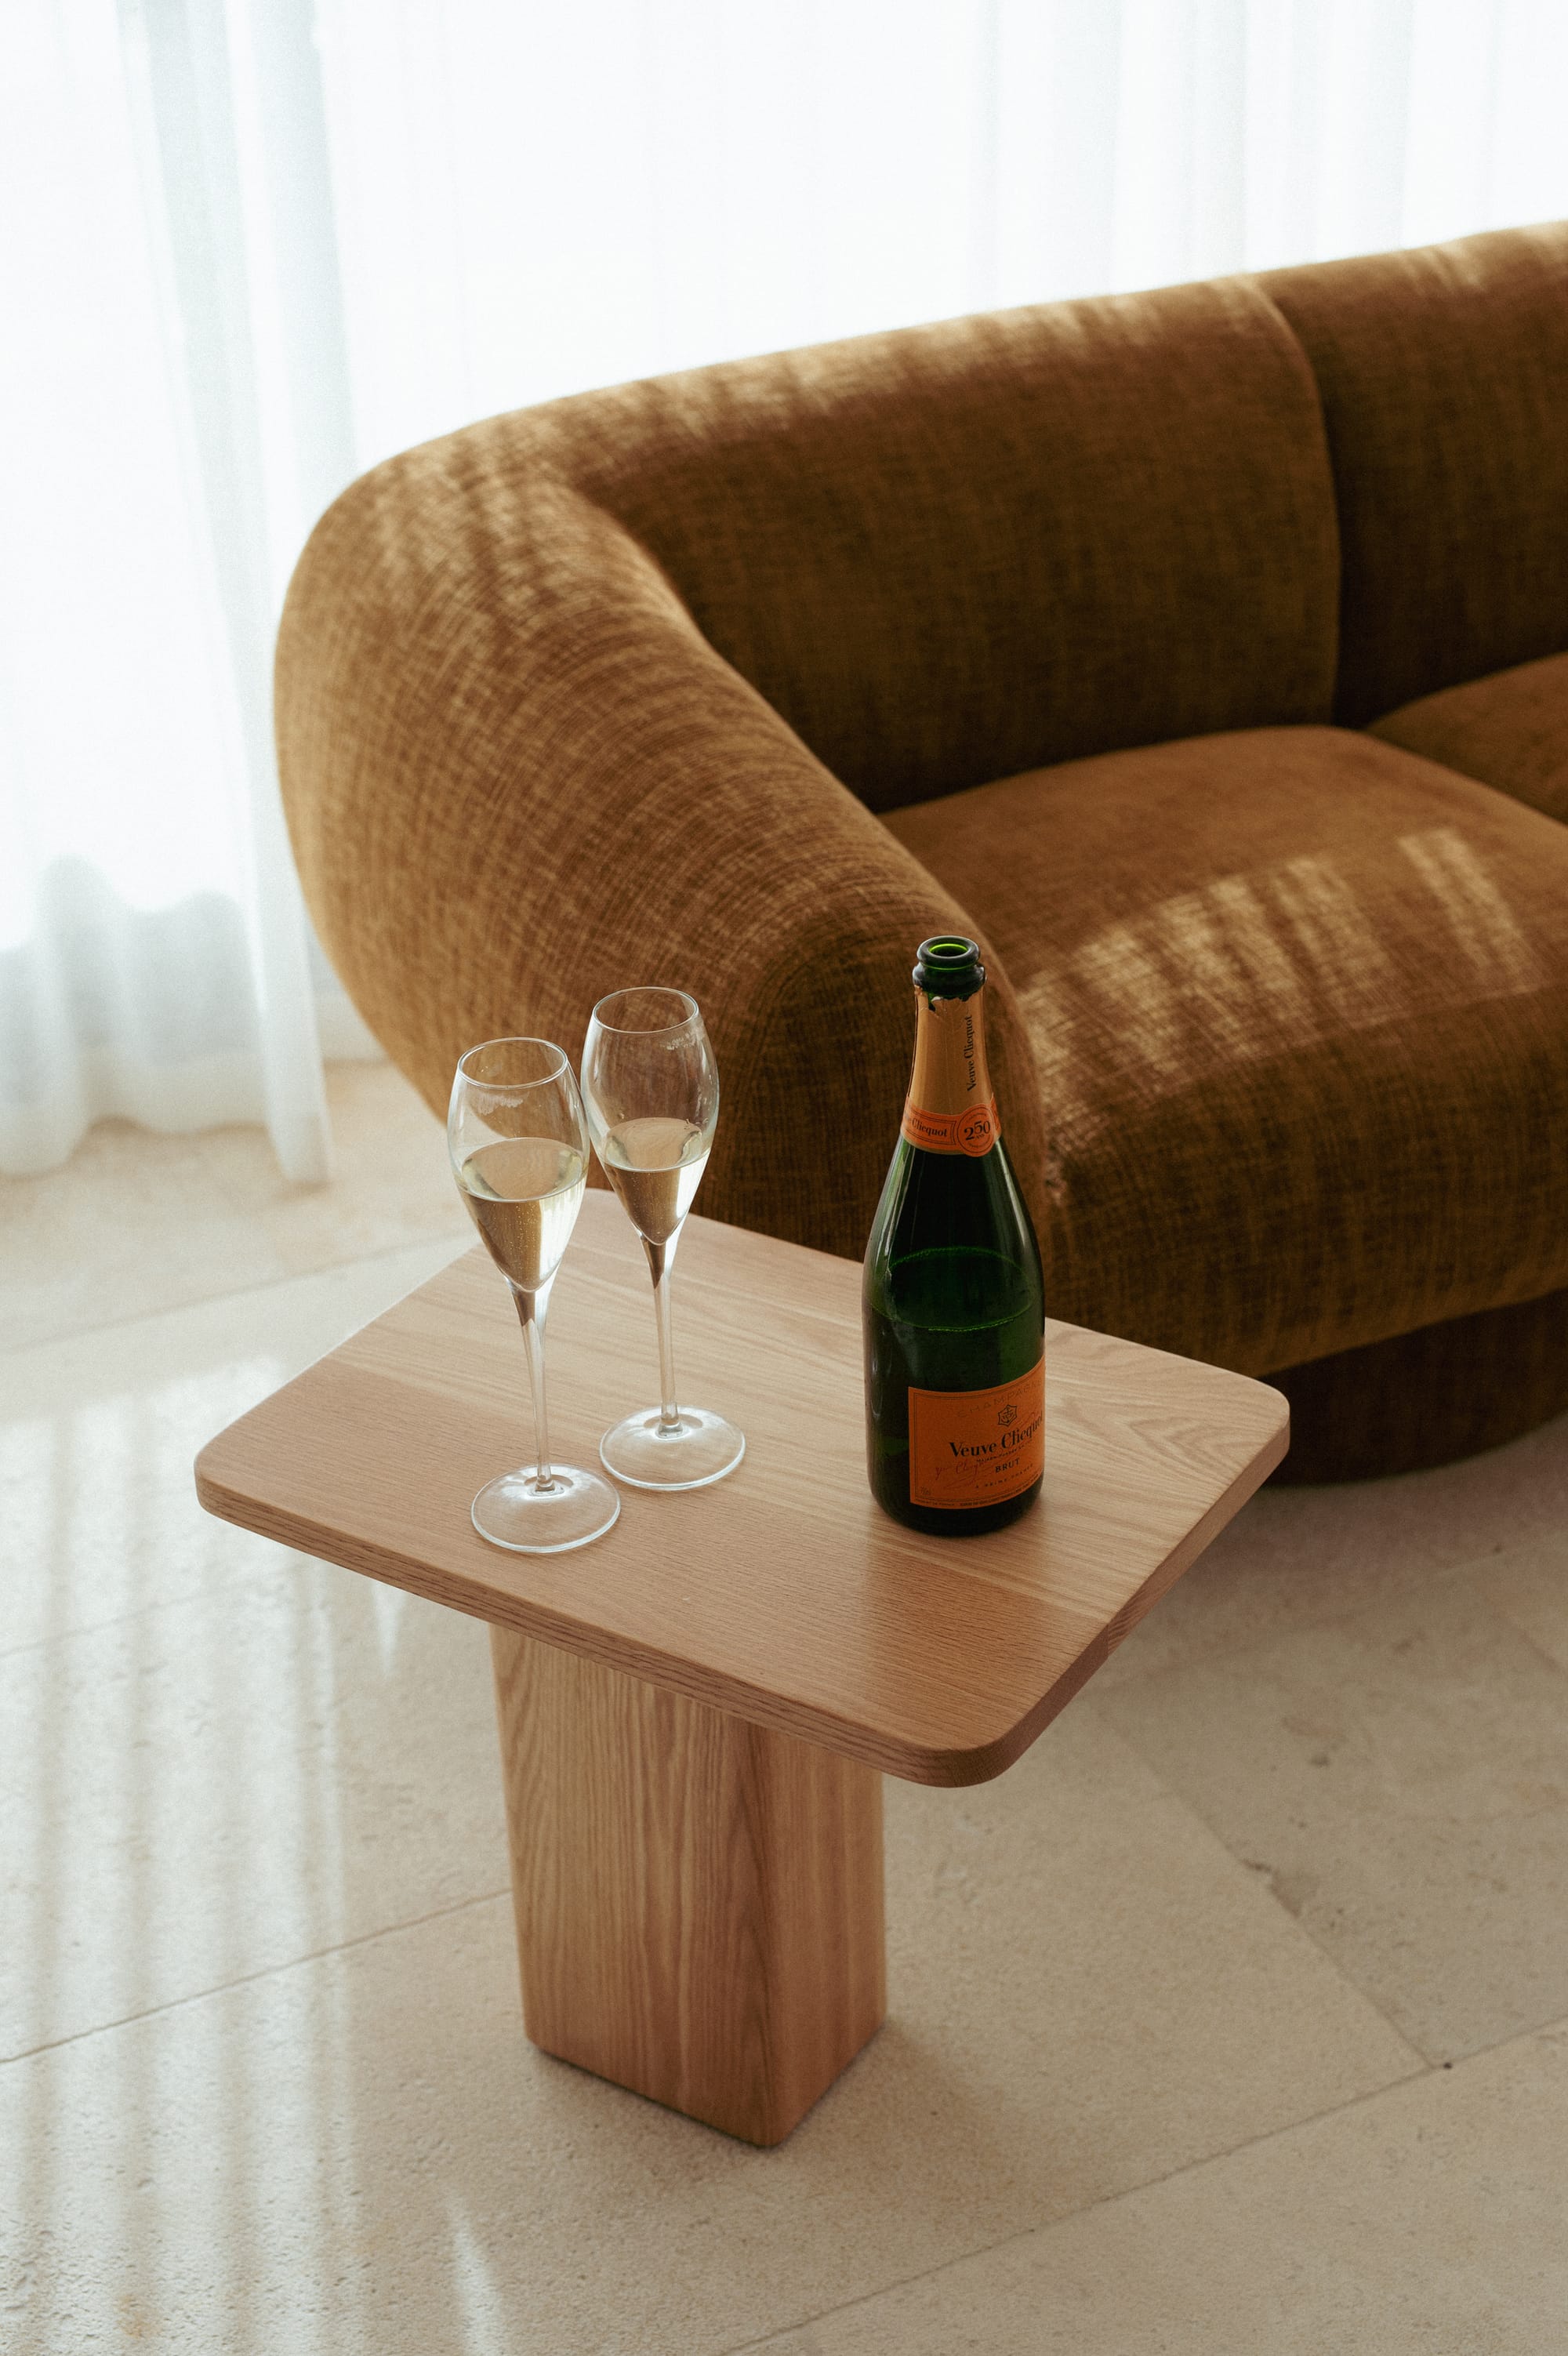 Made Furniture. Copyright of Made Furniture. Timber stool on tile floor with bottle of champagne and two glasses on it. Burnt orange sofa in background. 